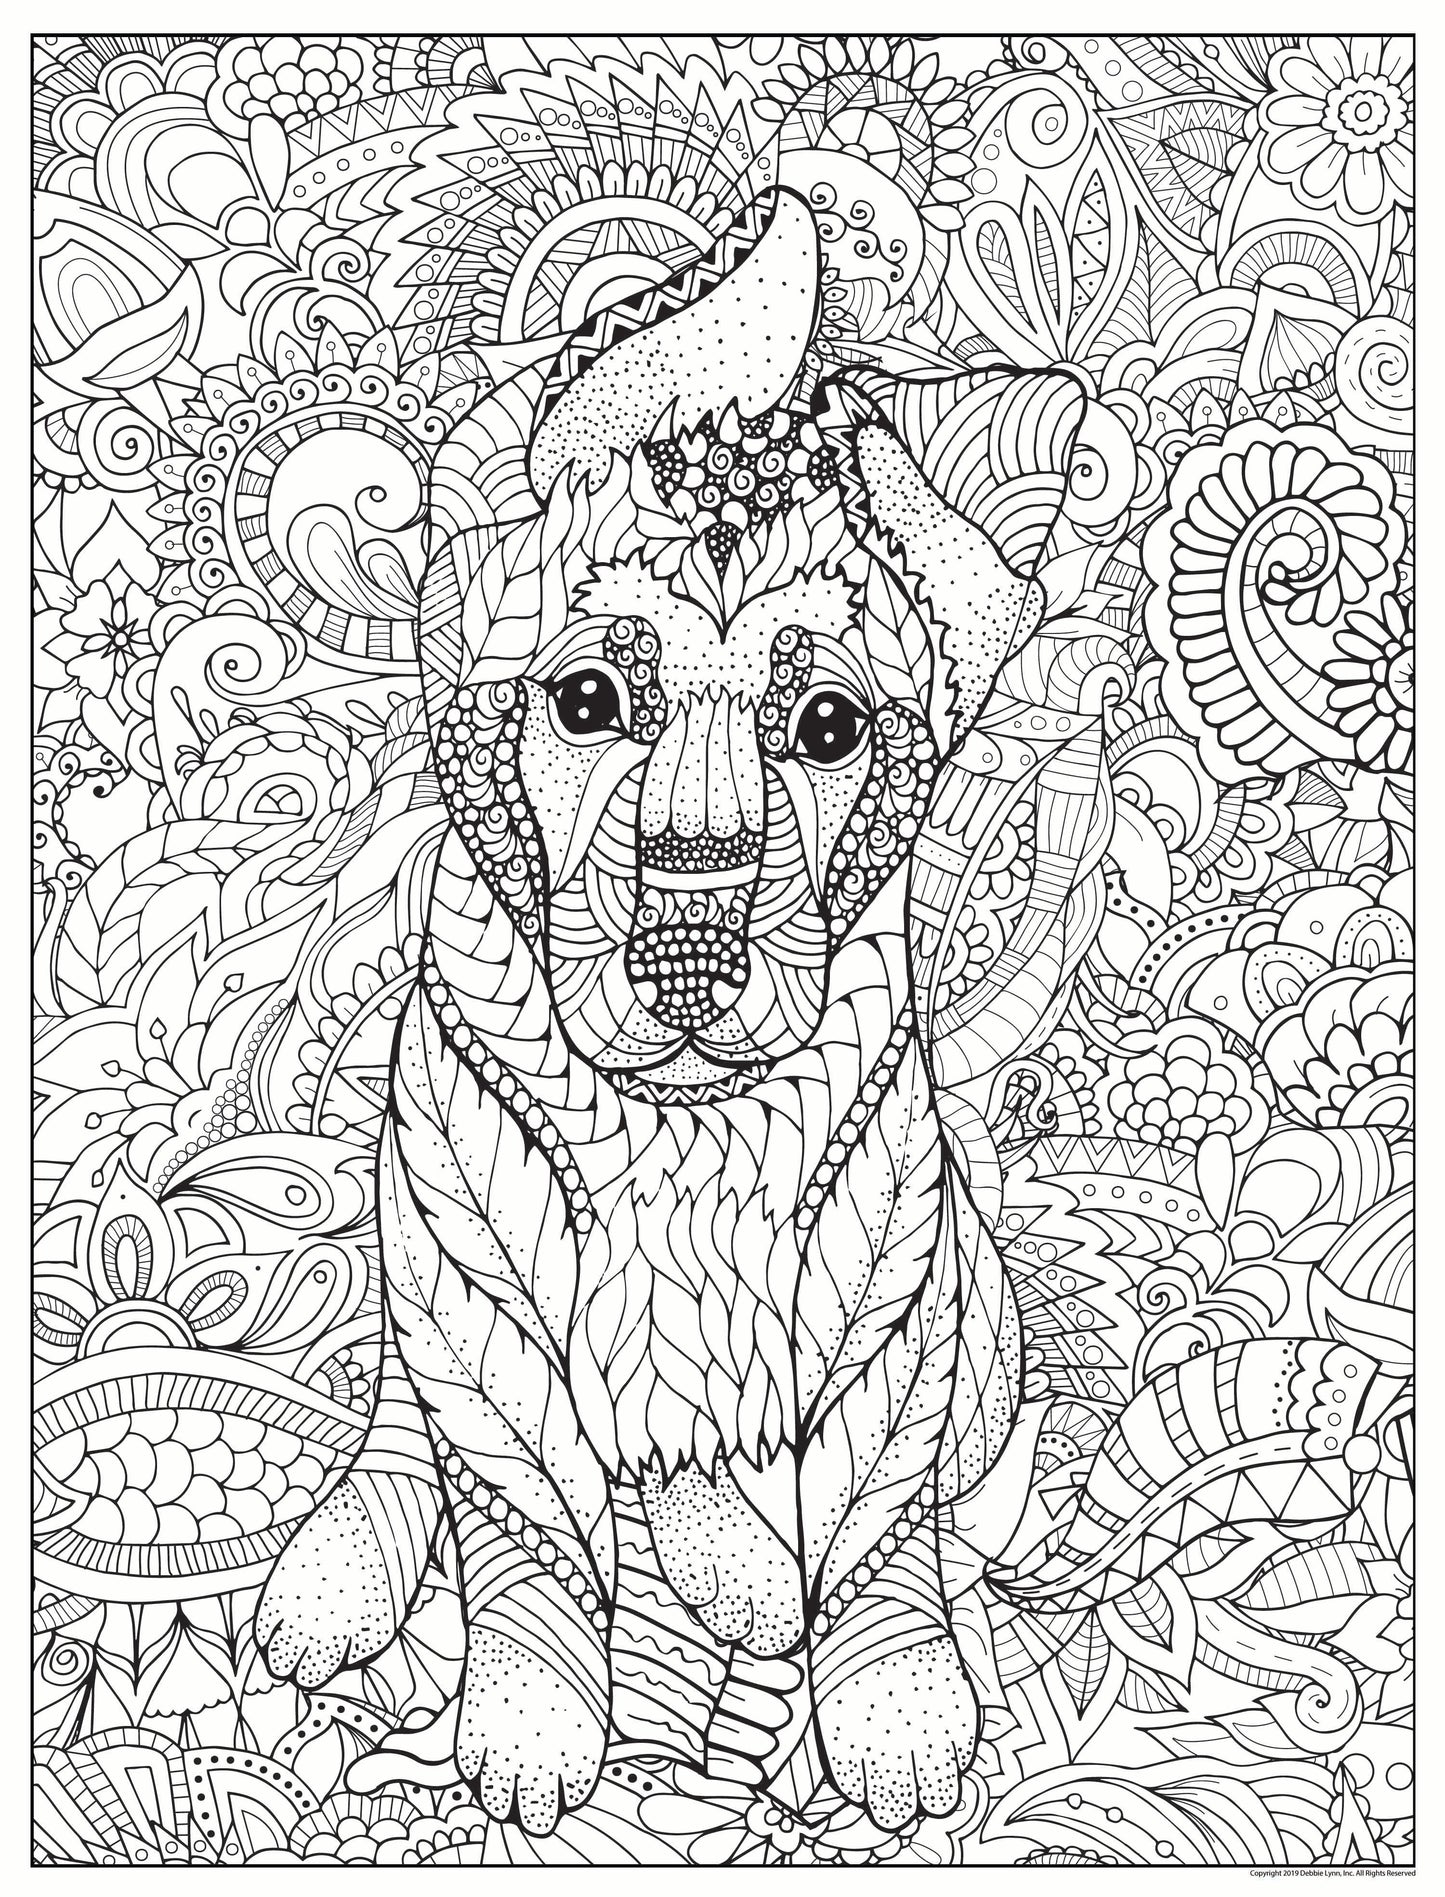 German Shepherd Personalized Giant Coloring Poster 46"x60"